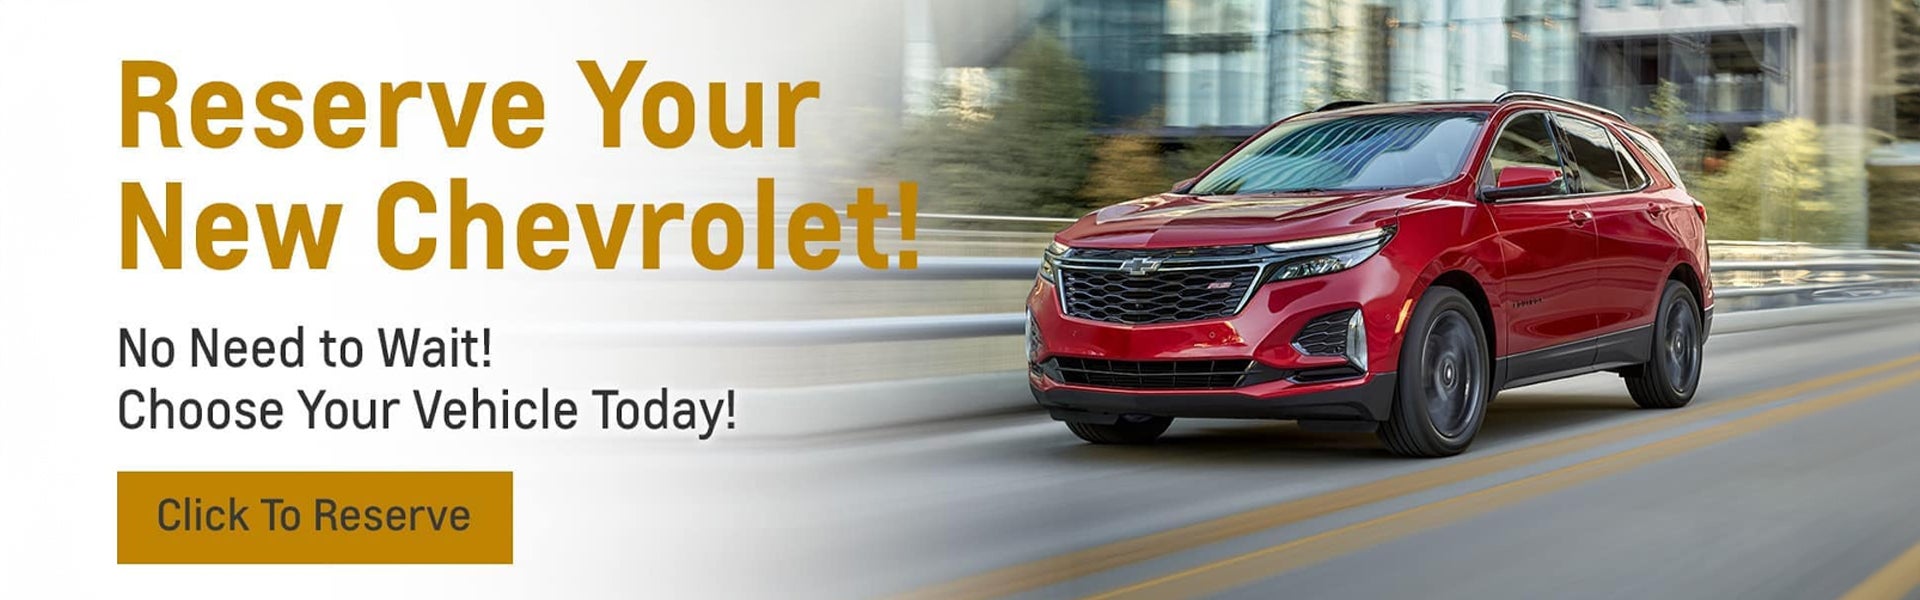 Reserve Your New Chevrolet